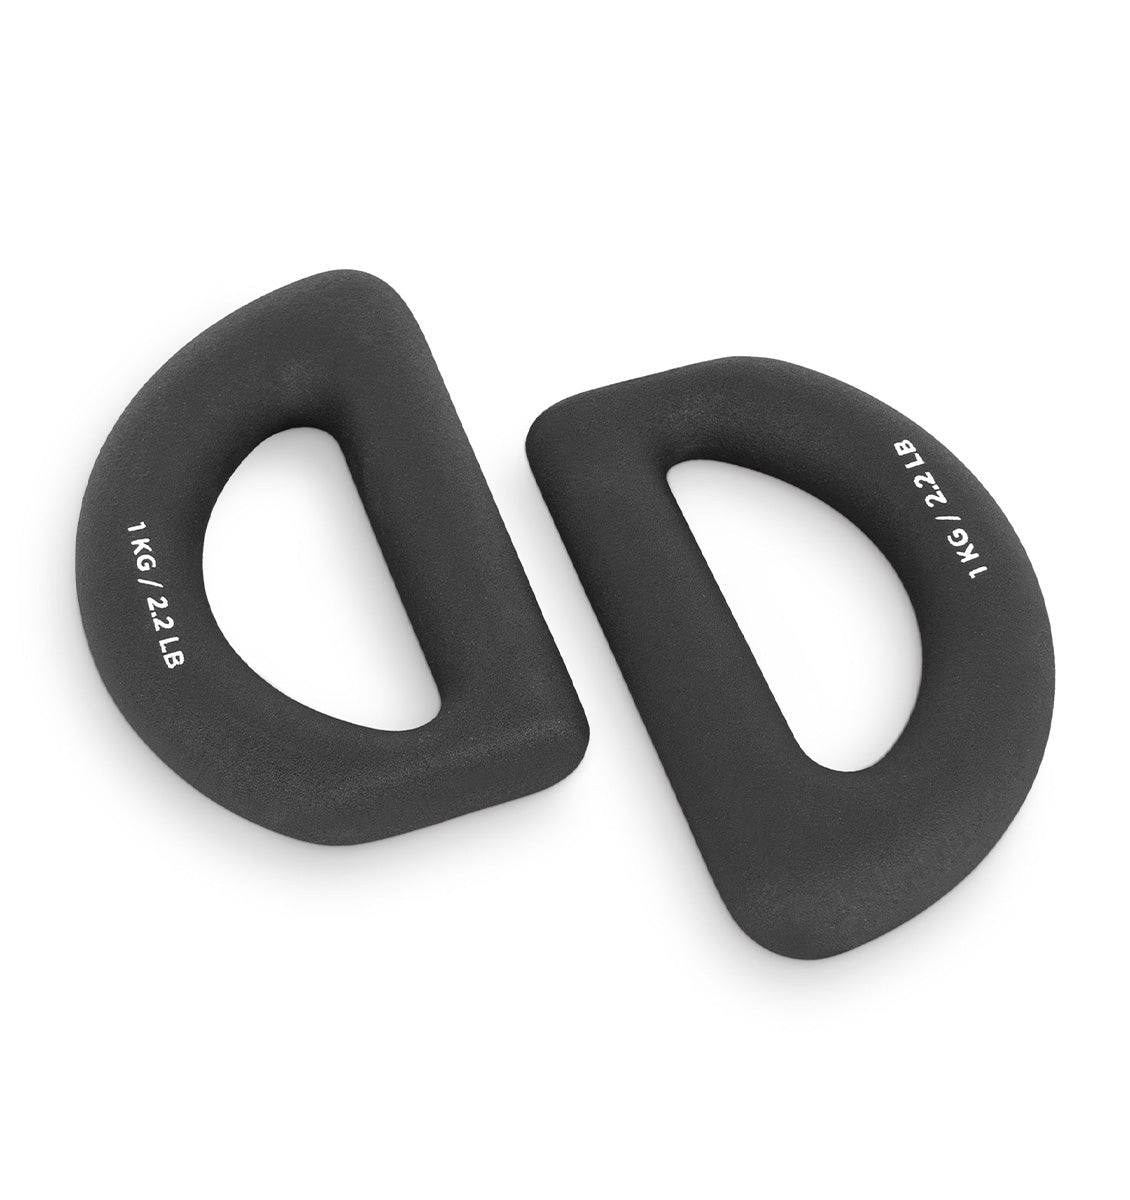 BAHE Halo Weight - 1kg - Pair - Anthracite - 2